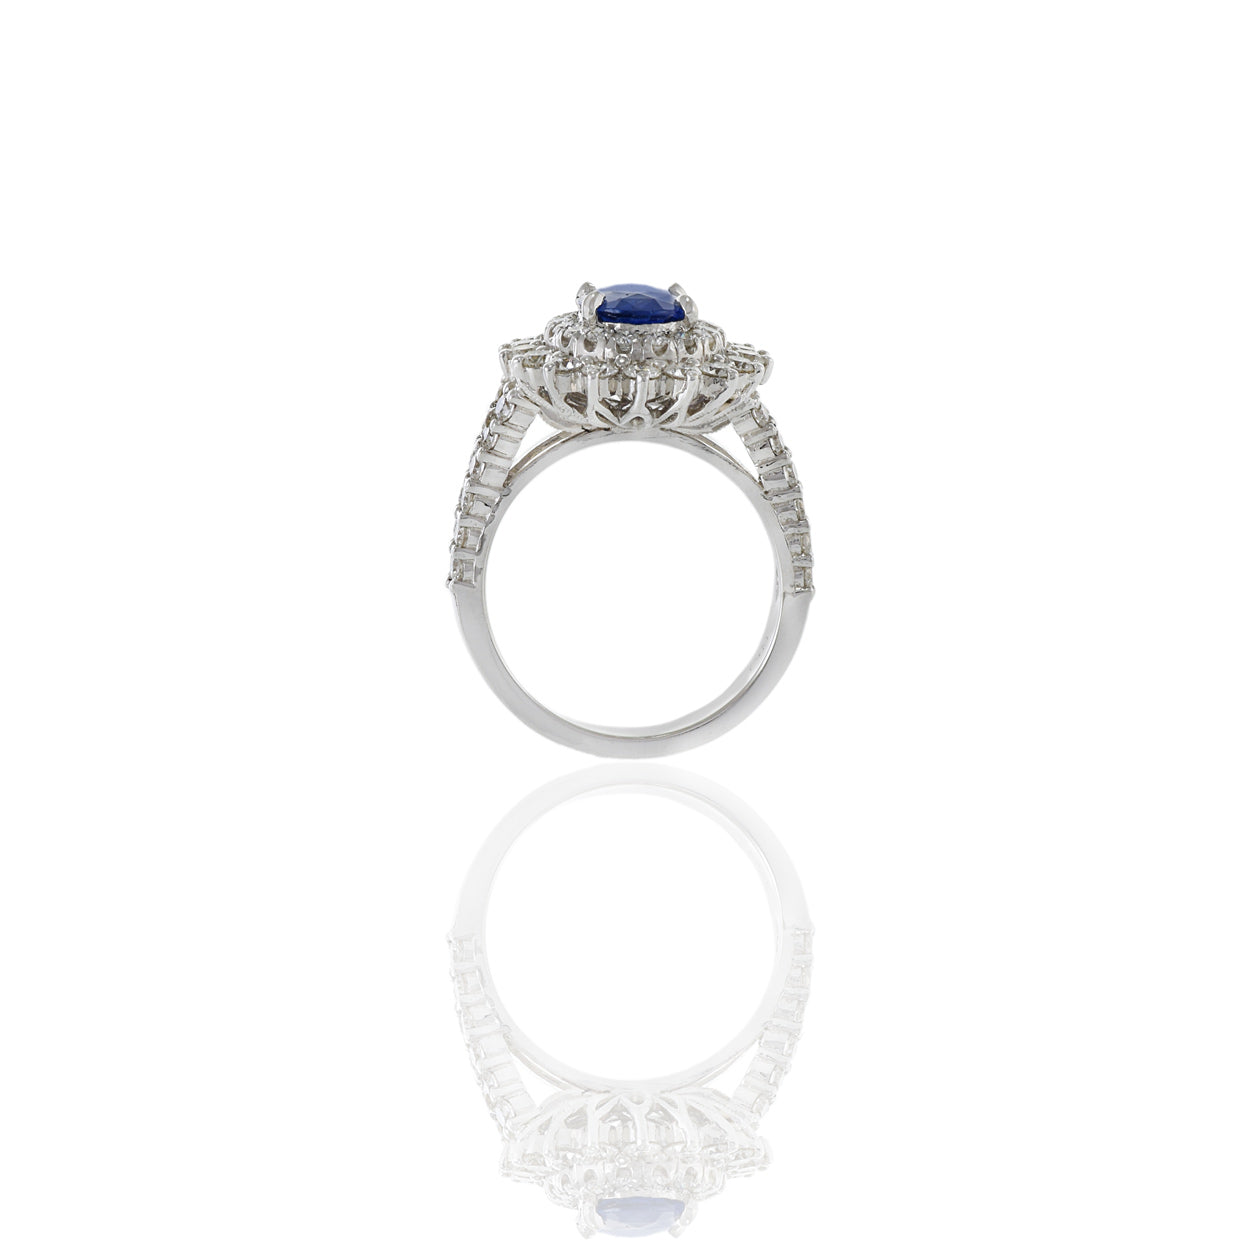 18KT White Gold GIA Certified Oval Sapphire and Diamond Ring